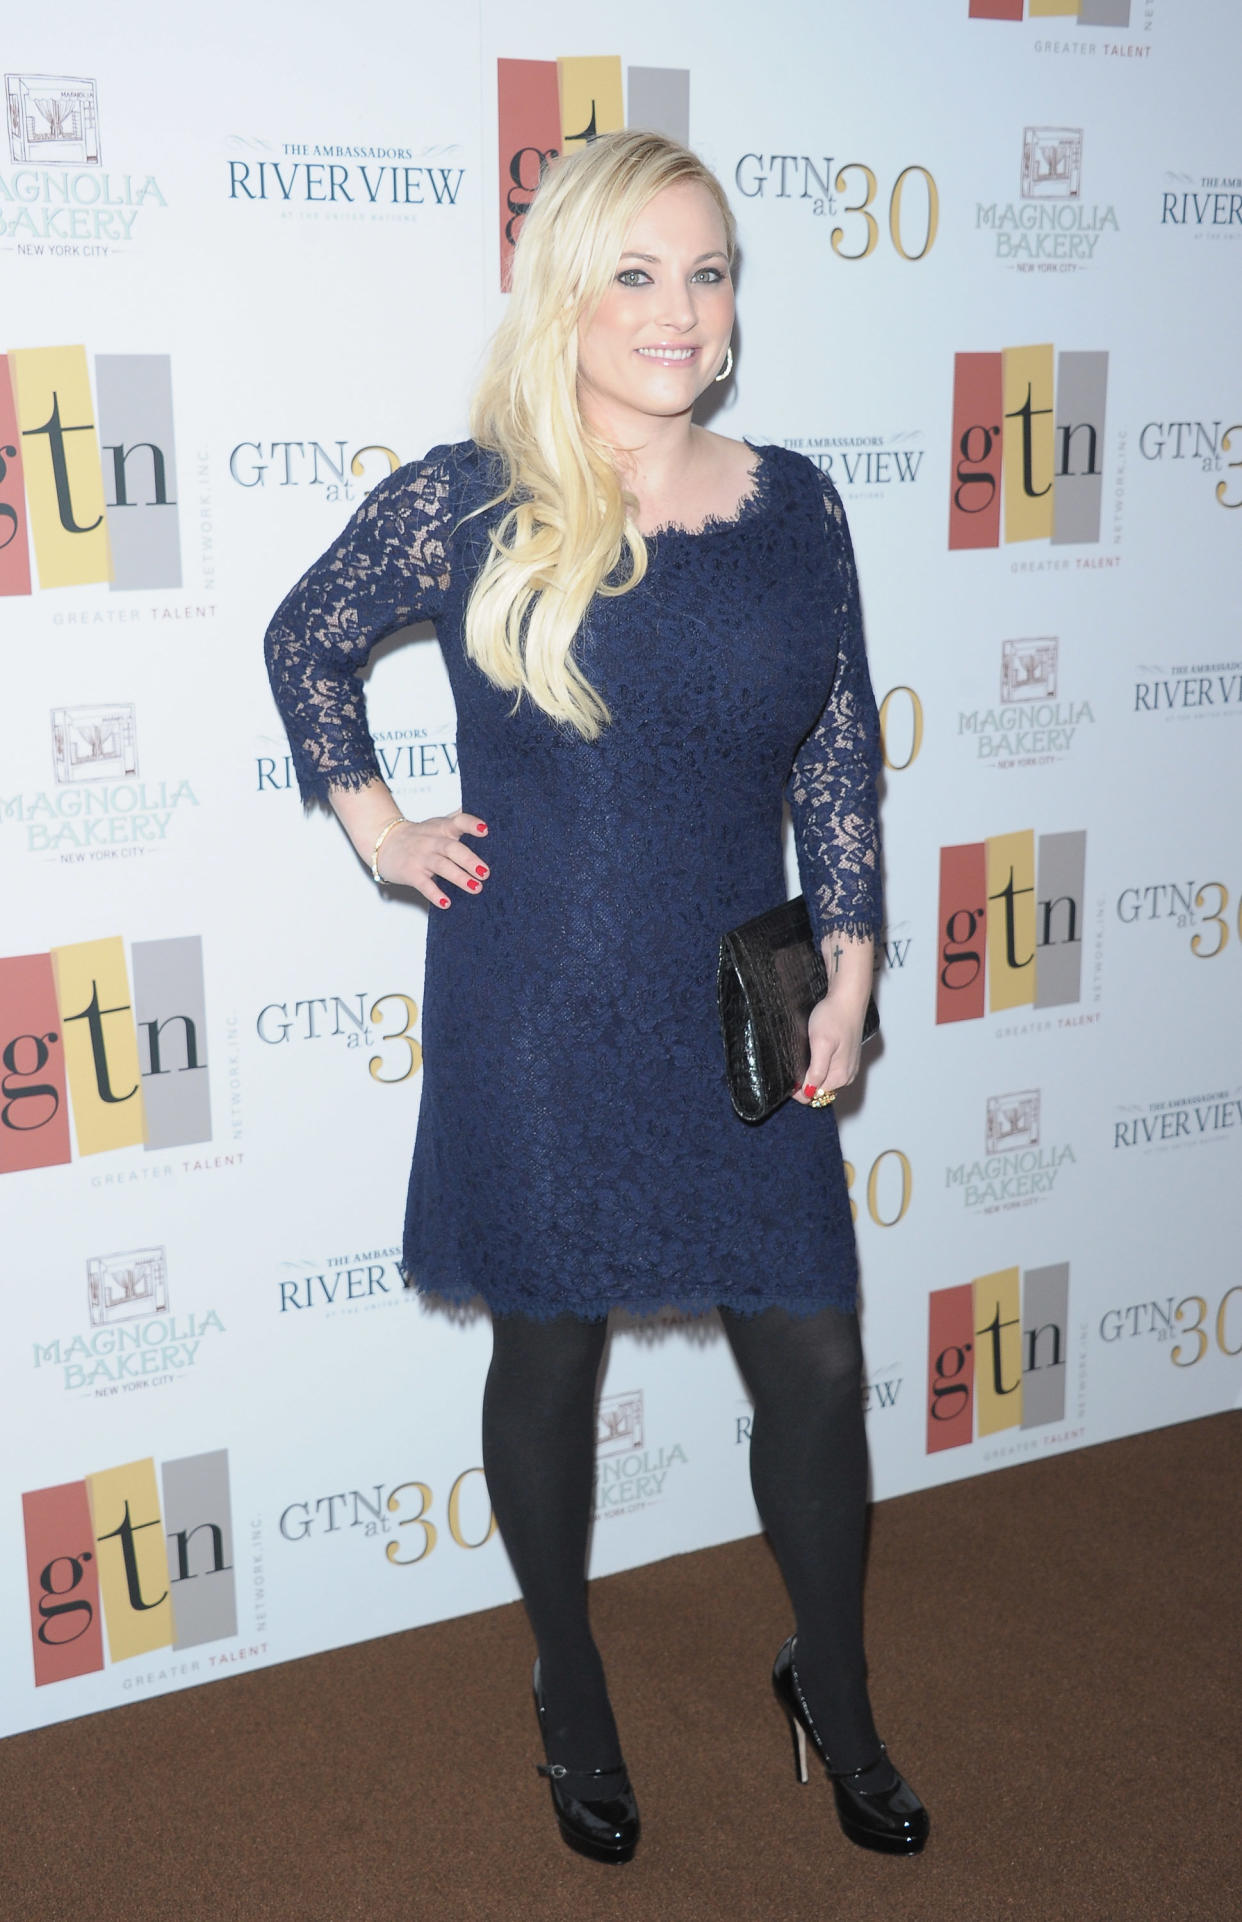 NEW YORK, NY - MAY 02:  Author Meghan McCain  attends the Greater Talent Network 30th anniversary party at the United Nations on May 2, 2012 in New York City.  (Photo by Michael Loccisano/Getty Images)